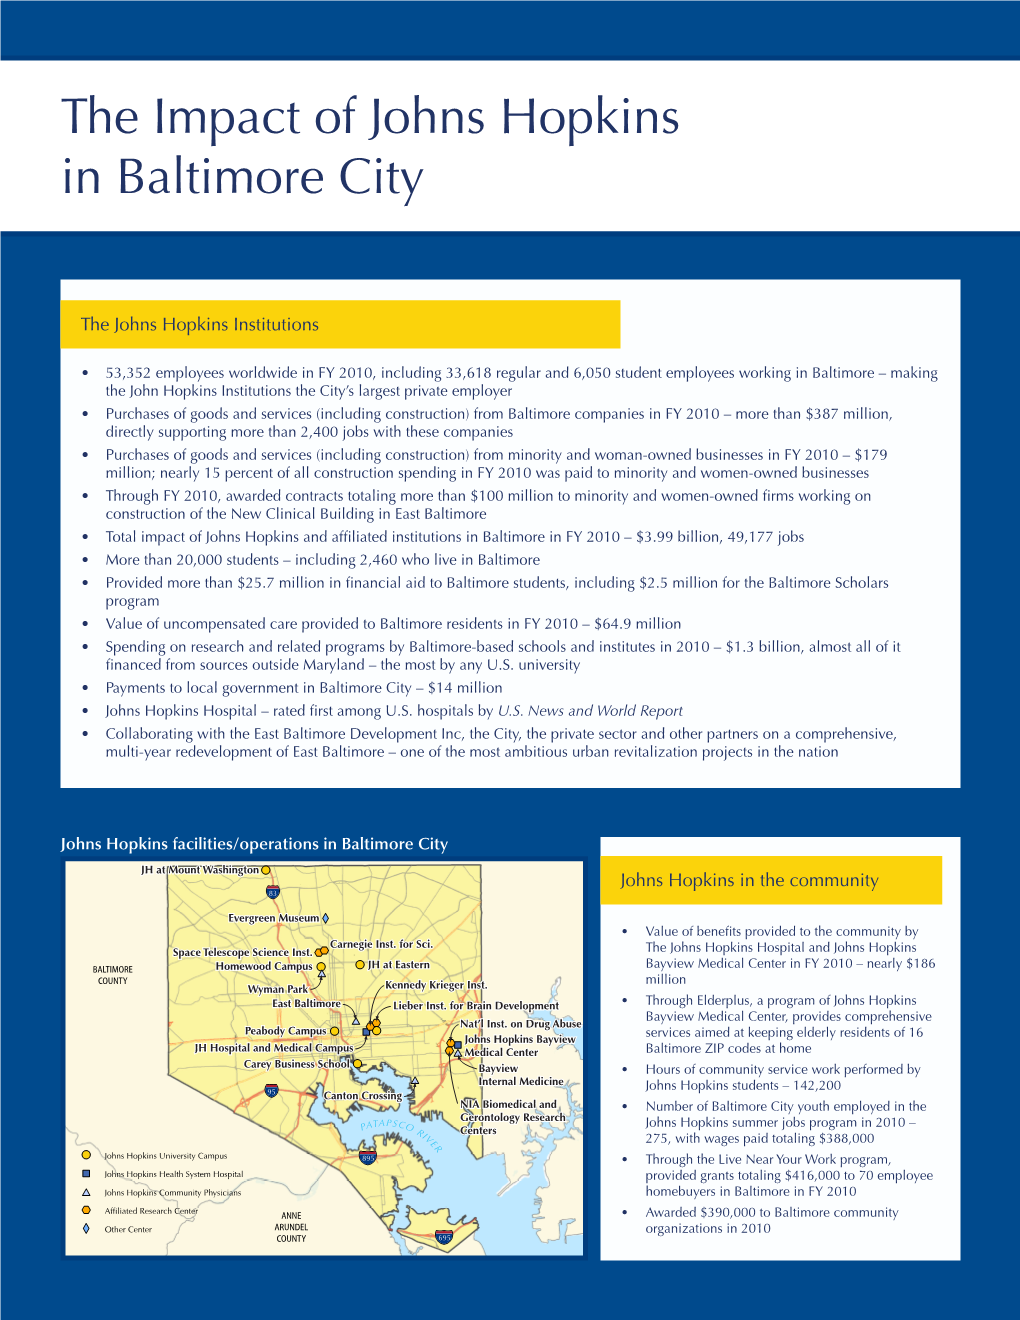 The Impact of Johns Hopkins in Baltimore City